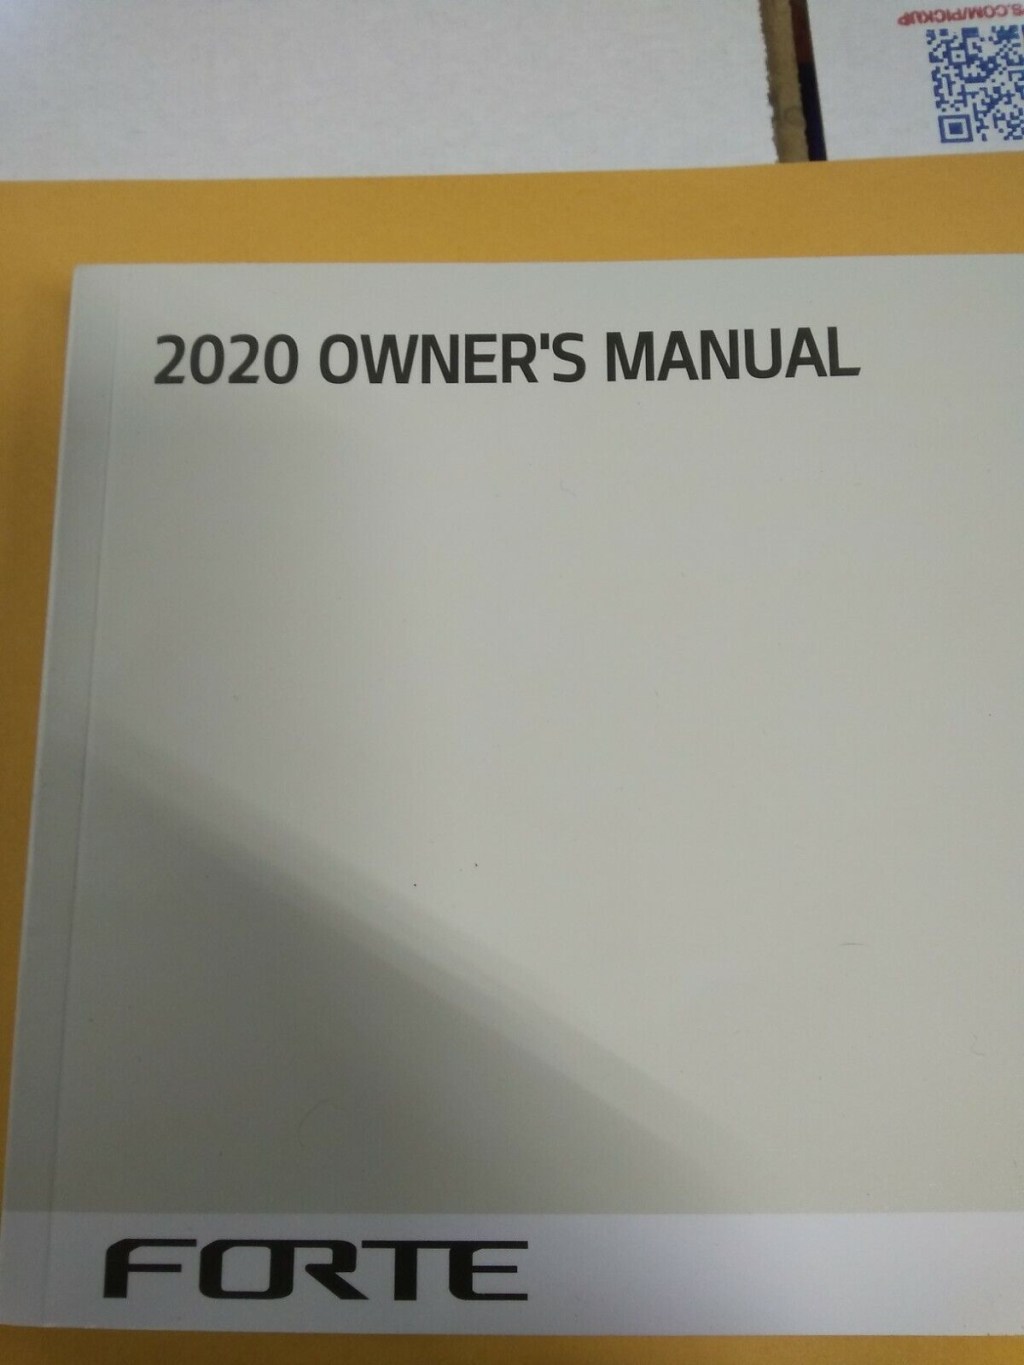 Picture of: KIA FORTE OWNERS MANUAL  eBay